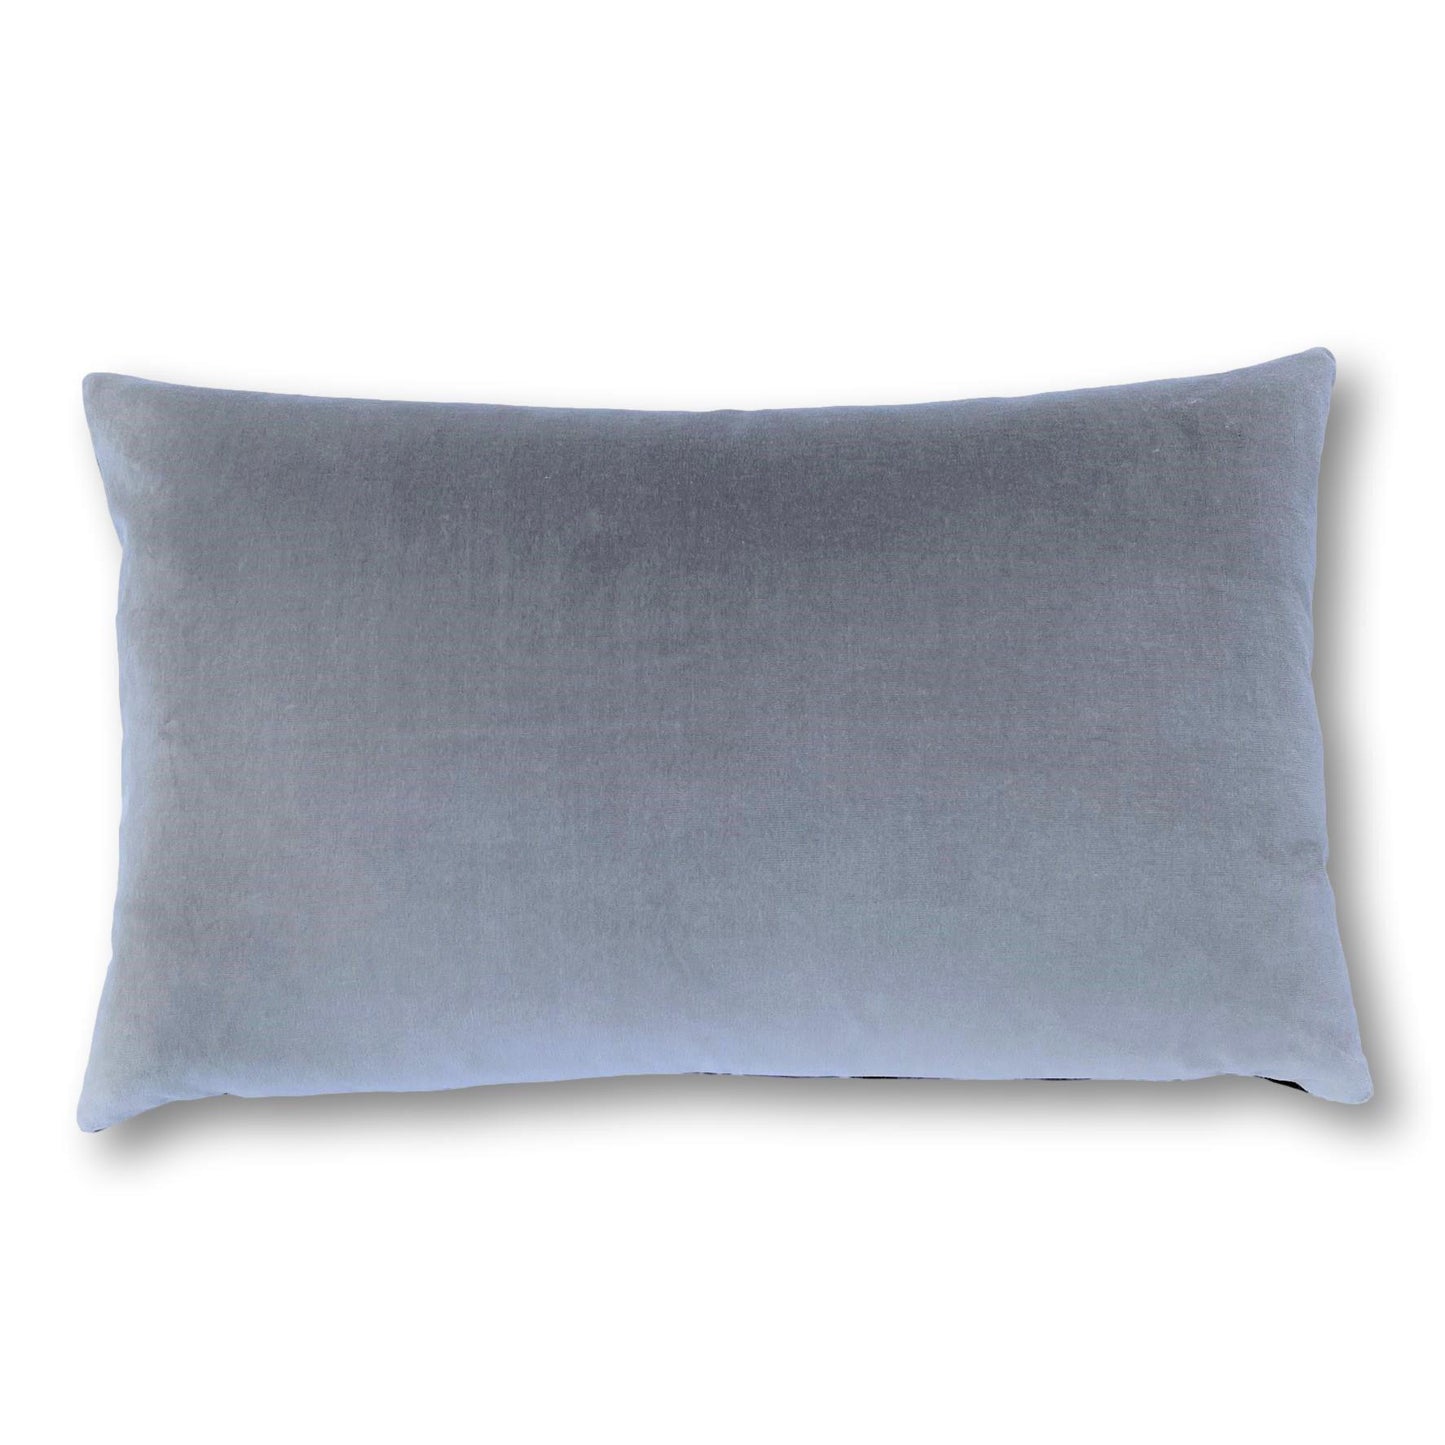 duck egg and grey cushions luxe 39